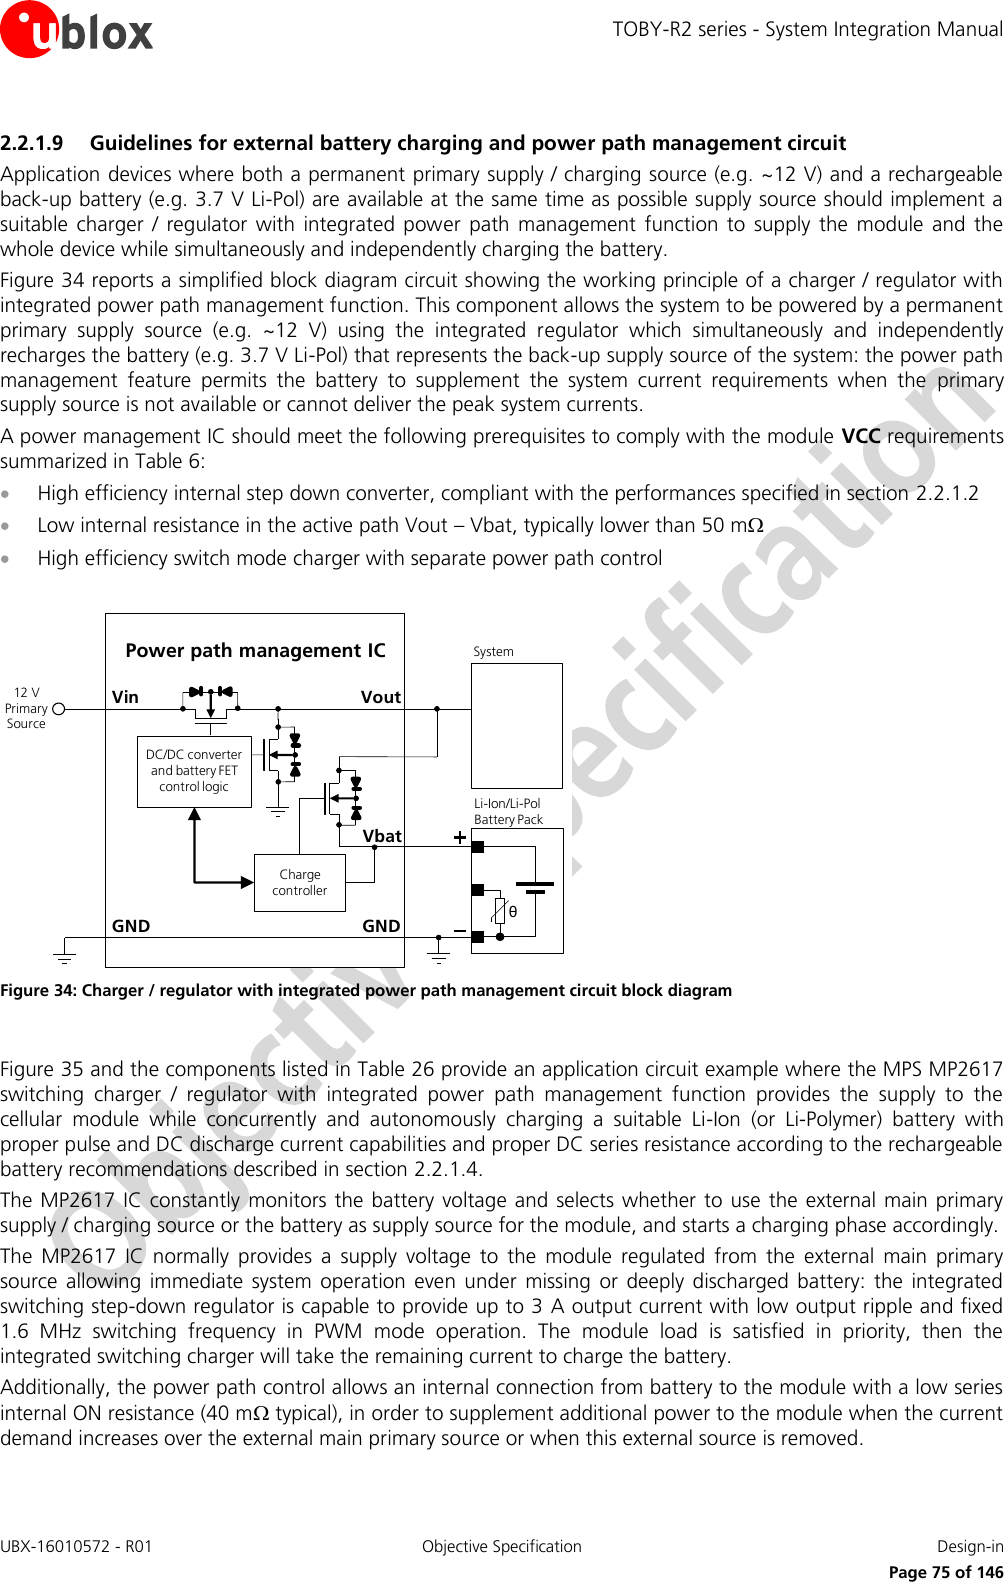 TOBY-R2 series - System Integration Manual UBX-16010572 - R01  Objective Specification  Design-in     Page 75 of 146 2.2.1.9 Guidelines for external battery charging and power path management circuit Application devices where both a permanent primary supply / charging source (e.g. ~12 V) and a rechargeable back-up battery (e.g. 3.7 V Li-Pol) are available at the same time as possible supply source should implement a suitable  charger  /  regulator  with  integrated  power  path management  function  to  supply the  module  and the whole device while simultaneously and independently charging the battery. Figure 34 reports a simplified block diagram circuit showing the working principle of a charger / regulator with integrated power path management function. This component allows the system to be powered by a permanent primary  supply  source  (e.g.  ~12  V)  using  the  integrated  regulator  which  simultaneously  and  independently recharges the battery (e.g. 3.7 V Li-Pol) that represents the back-up supply source of the system: the power path management  feature  permits  the  battery  to  supplement  the  system  current  requirements  when  the  primary supply source is not available or cannot deliver the peak system currents. A power management IC should meet the following prerequisites to comply with the module VCC requirements summarized in Table 6:  High efficiency internal step down converter, compliant with the performances specified in section 2.2.1.2  Low internal resistance in the active path Vout – Vbat, typically lower than 50 m  High efficiency switch mode charger with separate power path control  GNDPower path management ICVoutVinθLi-Ion/Li-Pol Battery PackGNDSystem12 V Primary SourceCharge controllerDC/DC converter and battery FET control logicVbat Figure 34: Charger / regulator with integrated power path management circuit block diagram  Figure 35 and the components listed in Table 26 provide an application circuit example where the MPS MP2617 switching  charger  /  regulator  with  integrated  power  path  management  function  provides  the  supply  to  the cellular  module  while  concurrently  and  autonomously  charging  a  suitable  Li-Ion  (or  Li-Polymer)  battery  with proper pulse and DC discharge current capabilities and proper DC series resistance according to the rechargeable battery recommendations described in section 2.2.1.4. The MP2617 IC constantly  monitors the battery voltage  and  selects  whether to use  the  external main primary supply / charging source or the battery as supply source for the module, and starts a charging phase accordingly.  The  MP2617  IC  normally  provides  a  supply  voltage  to  the  module  regulated  from  the  external  main  primary source  allowing  immediate  system operation  even  under  missing  or  deeply  discharged  battery:  the  integrated switching step-down regulator is capable to provide up to 3 A output current with low output ripple and fixed 1.6  MHz  switching  frequency  in  PWM  mode  operation.  The  module  load  is  satisfied  in  priority,  then  the integrated switching charger will take the remaining current to charge the battery. Additionally, the power path control allows an internal connection from battery to the module with a low series internal ON resistance (40 m typical), in order to supplement additional power to the module when the current demand increases over the external main primary source or when this external source is removed.  